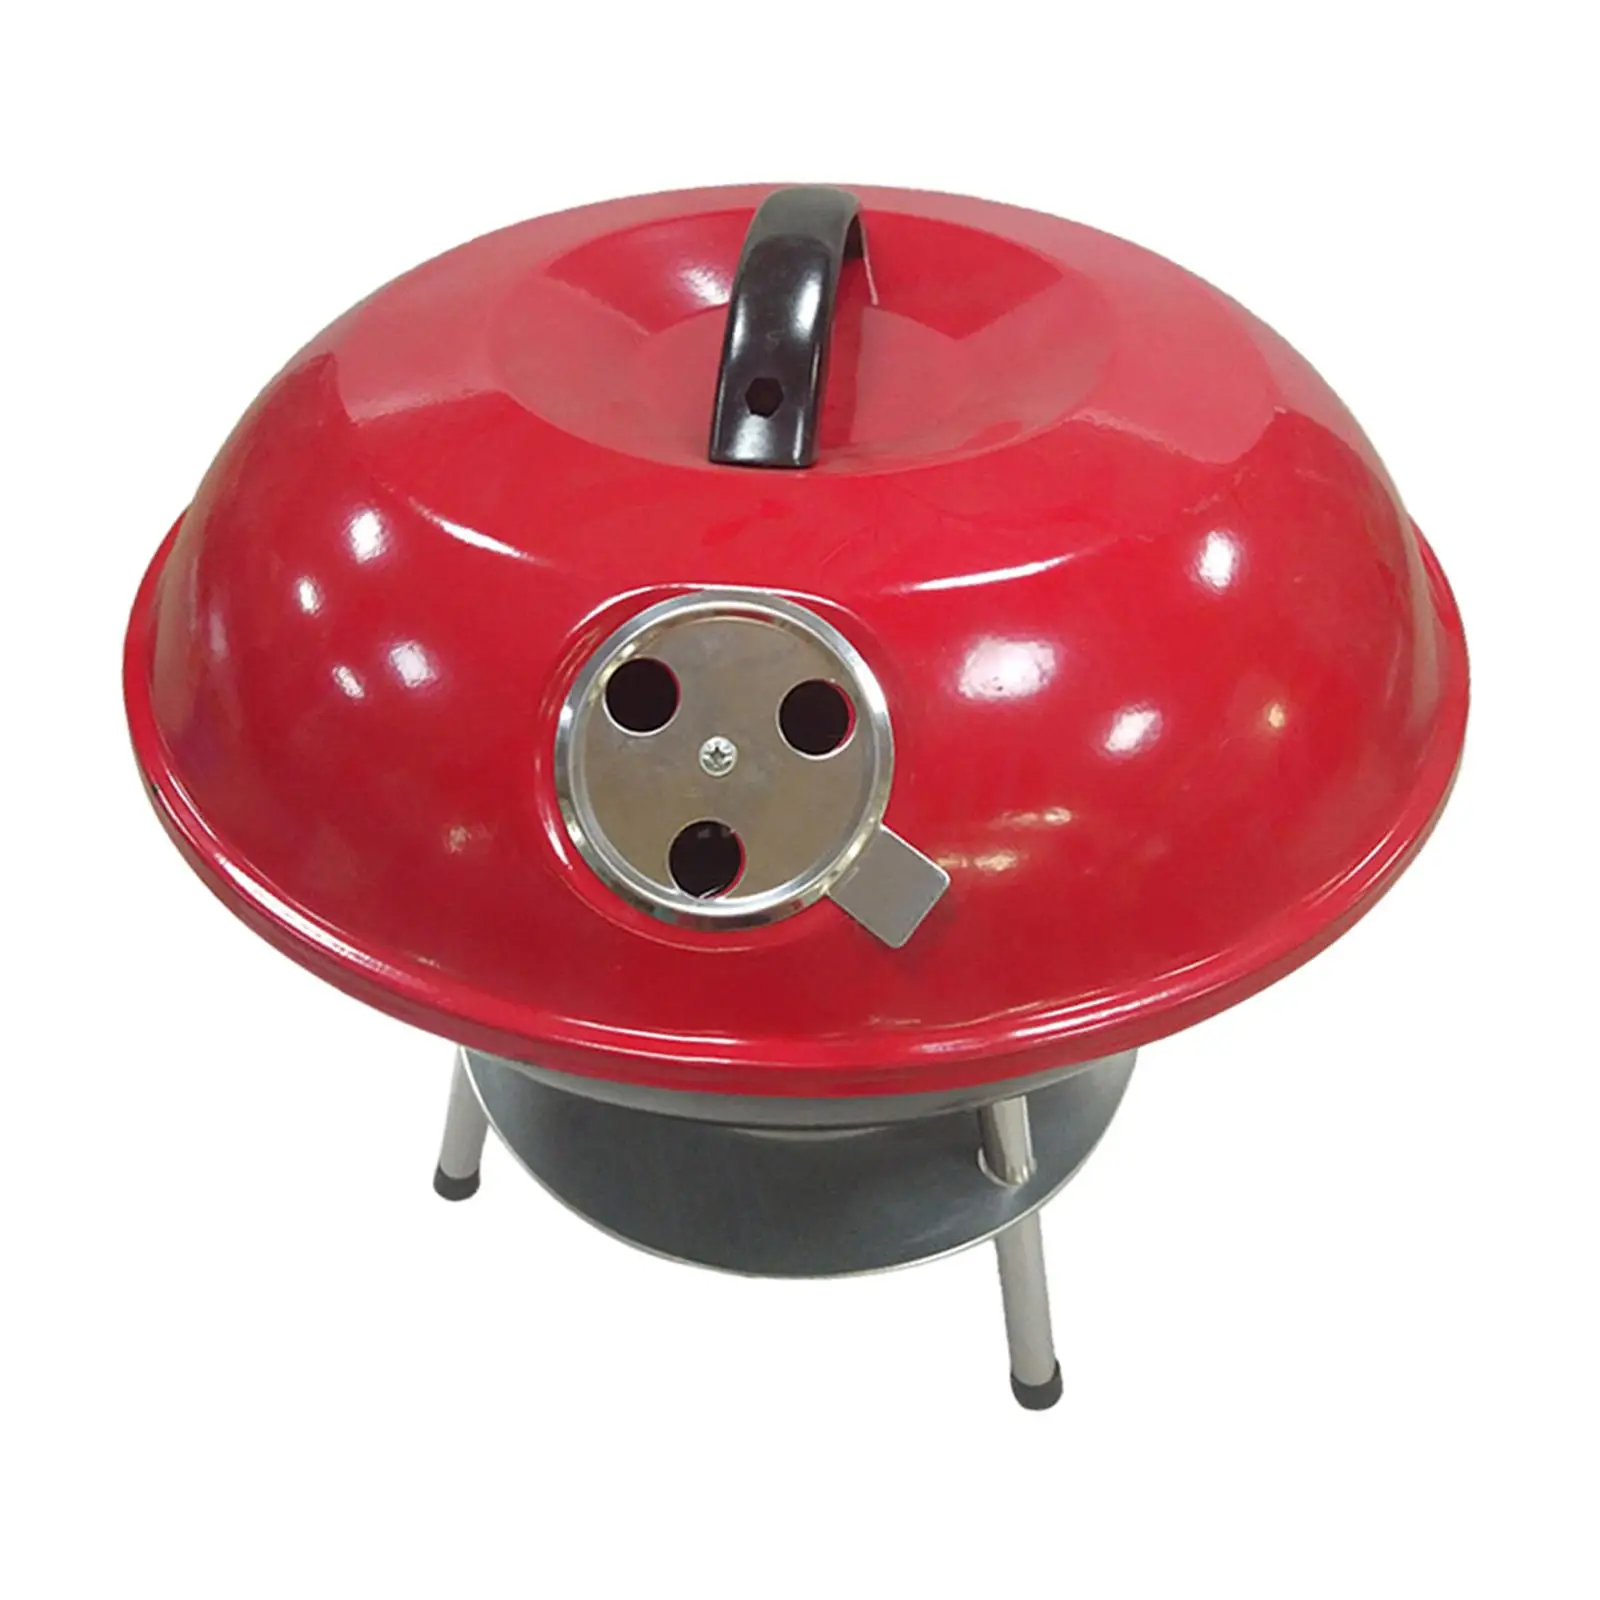 Barbecue Grill Stove Small Charcoal Grill for Picnic Patio Outdoor Grilling